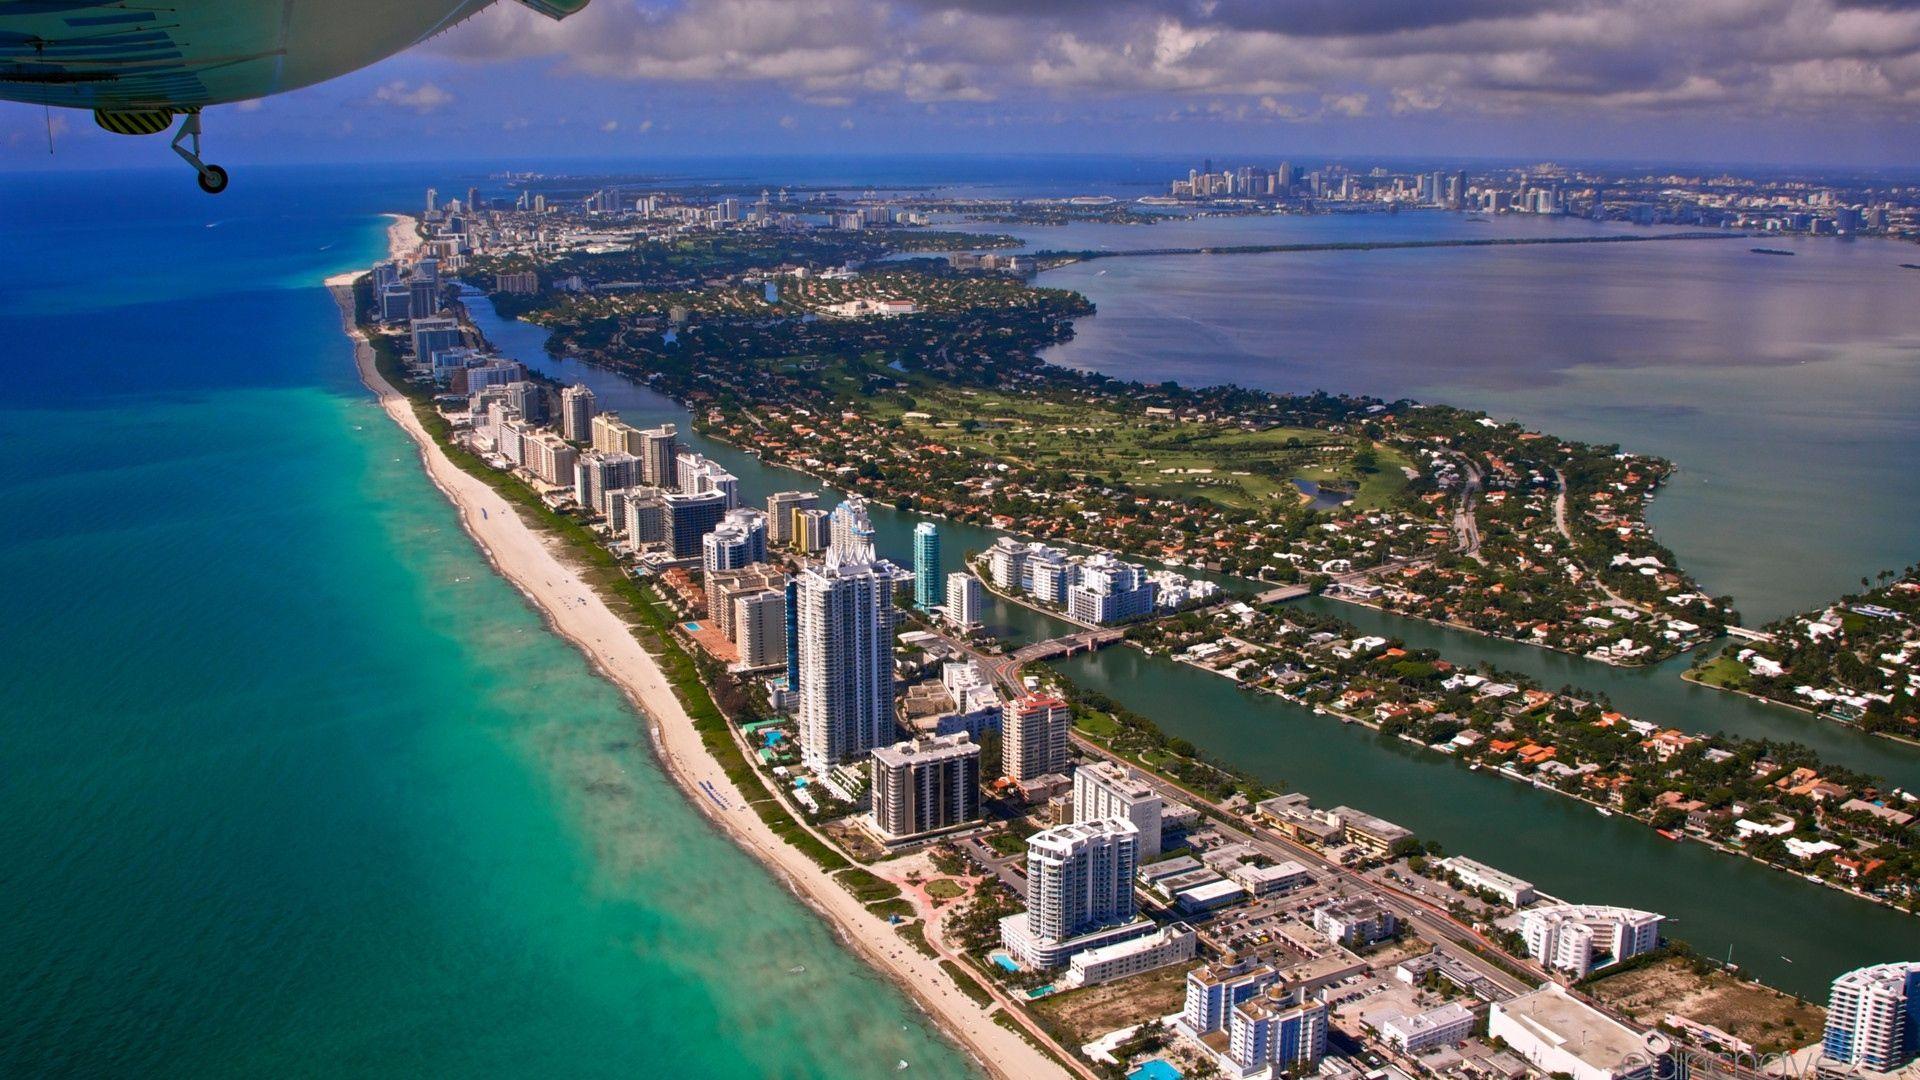 Download Wallpaper 1920x1080 miami, city, flight, view from